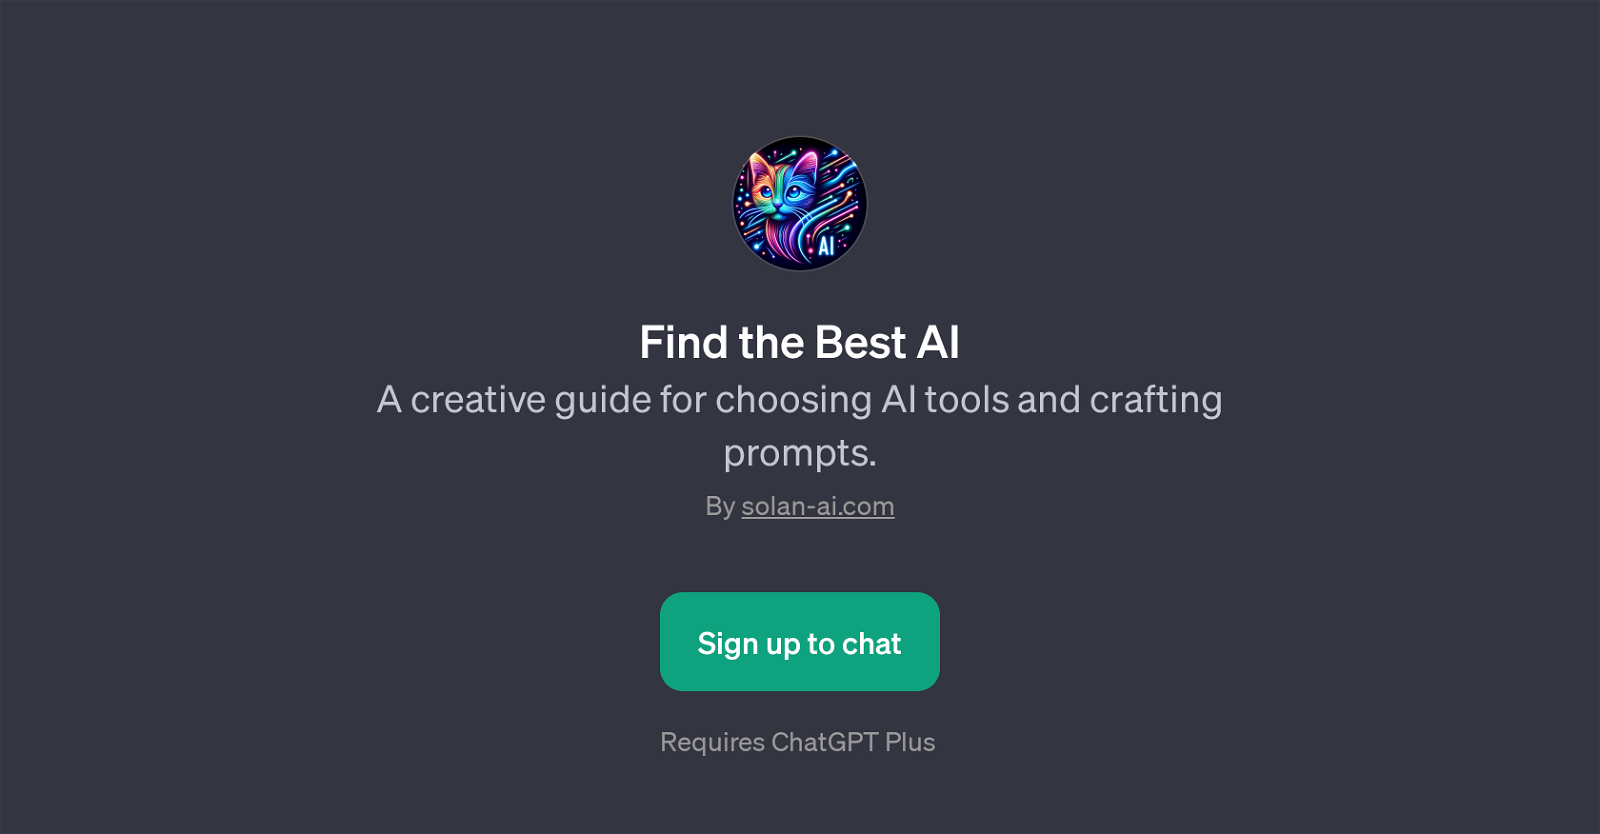 Find the Best AI website